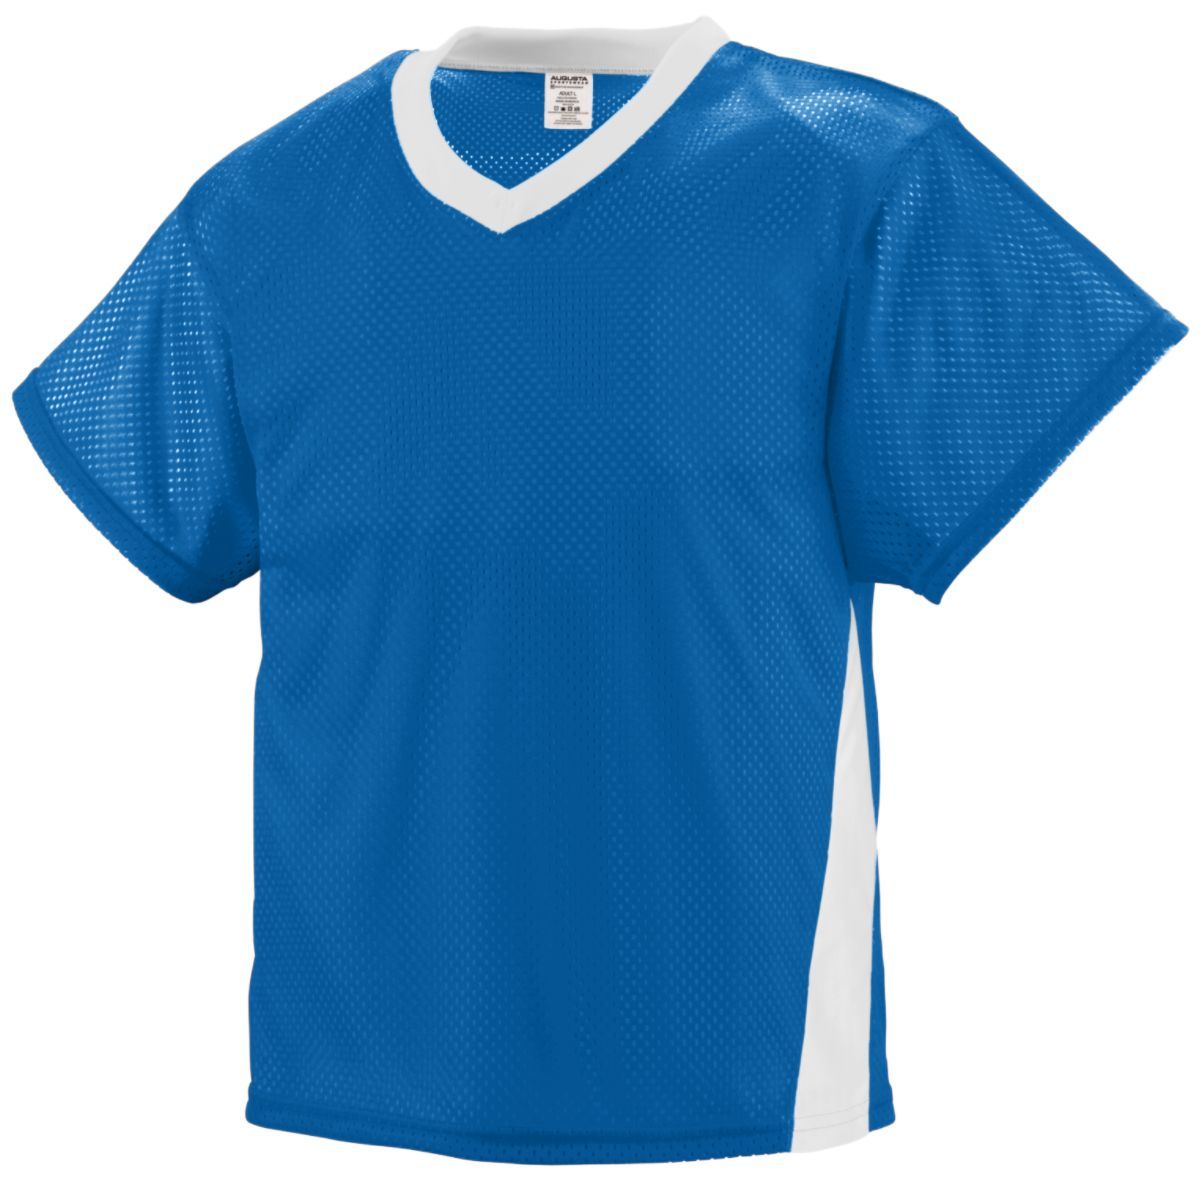 Augusta Sportswear High Score Jersey in Royal/White  -Part of the Adult, Adult-Jersey, Augusta-Products, Lacrosse, Shirts, All-Sports, All-Sports-1 product lines at KanaleyCreations.com